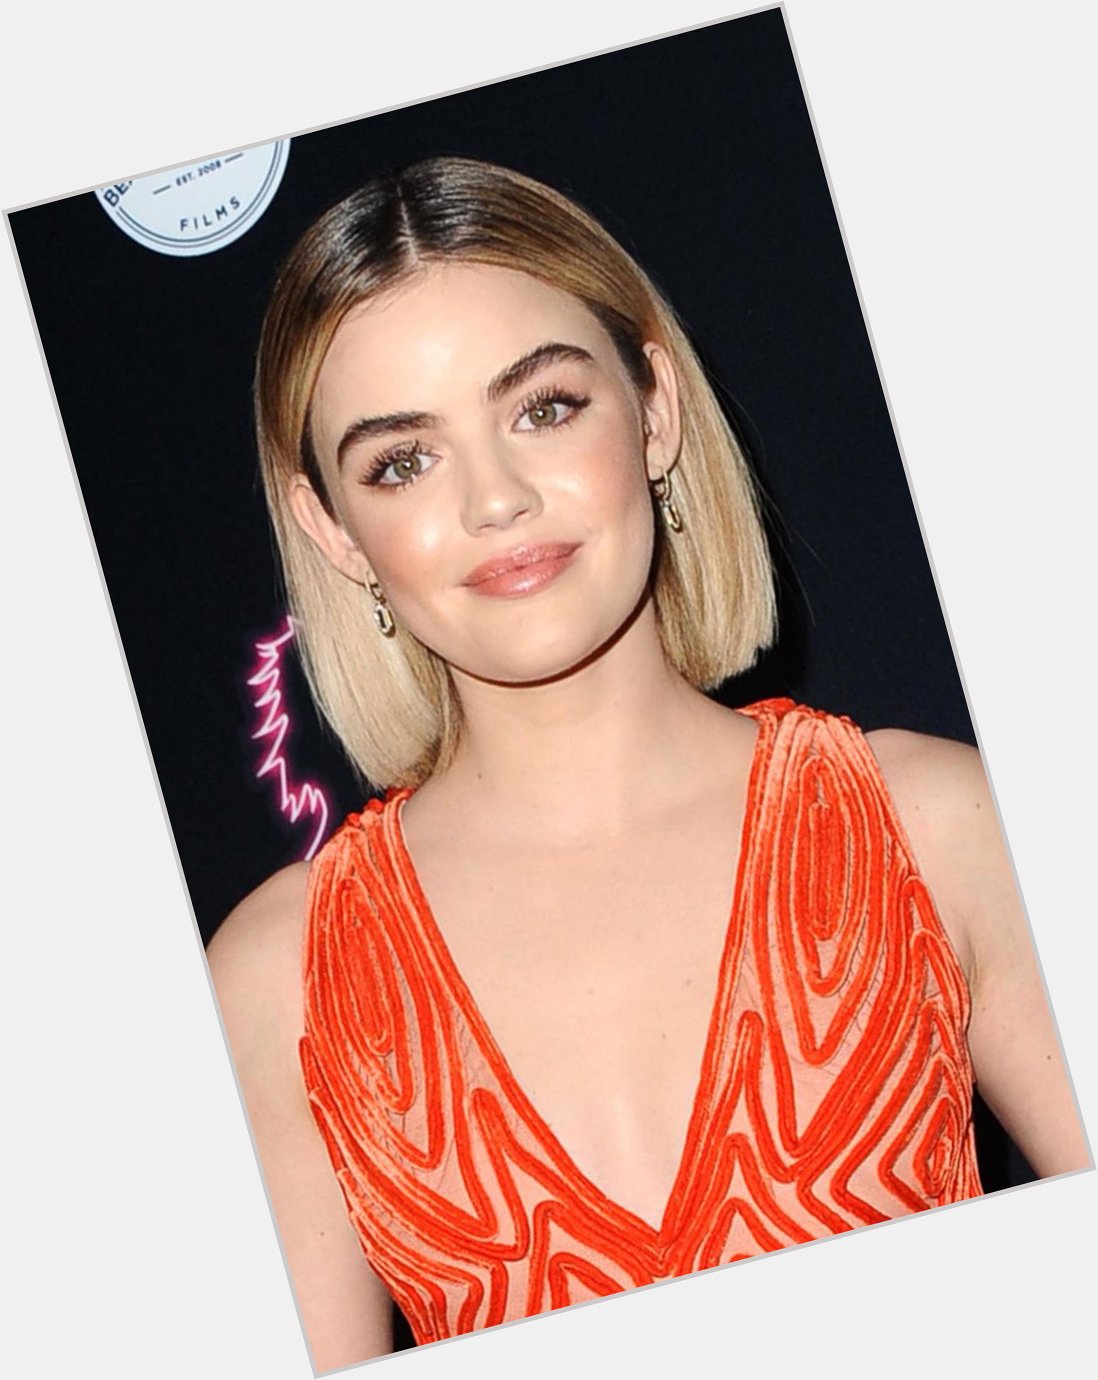 Happy Birthday to the very cute Lucy Hale. I prefer taller women but she is a cutie. 